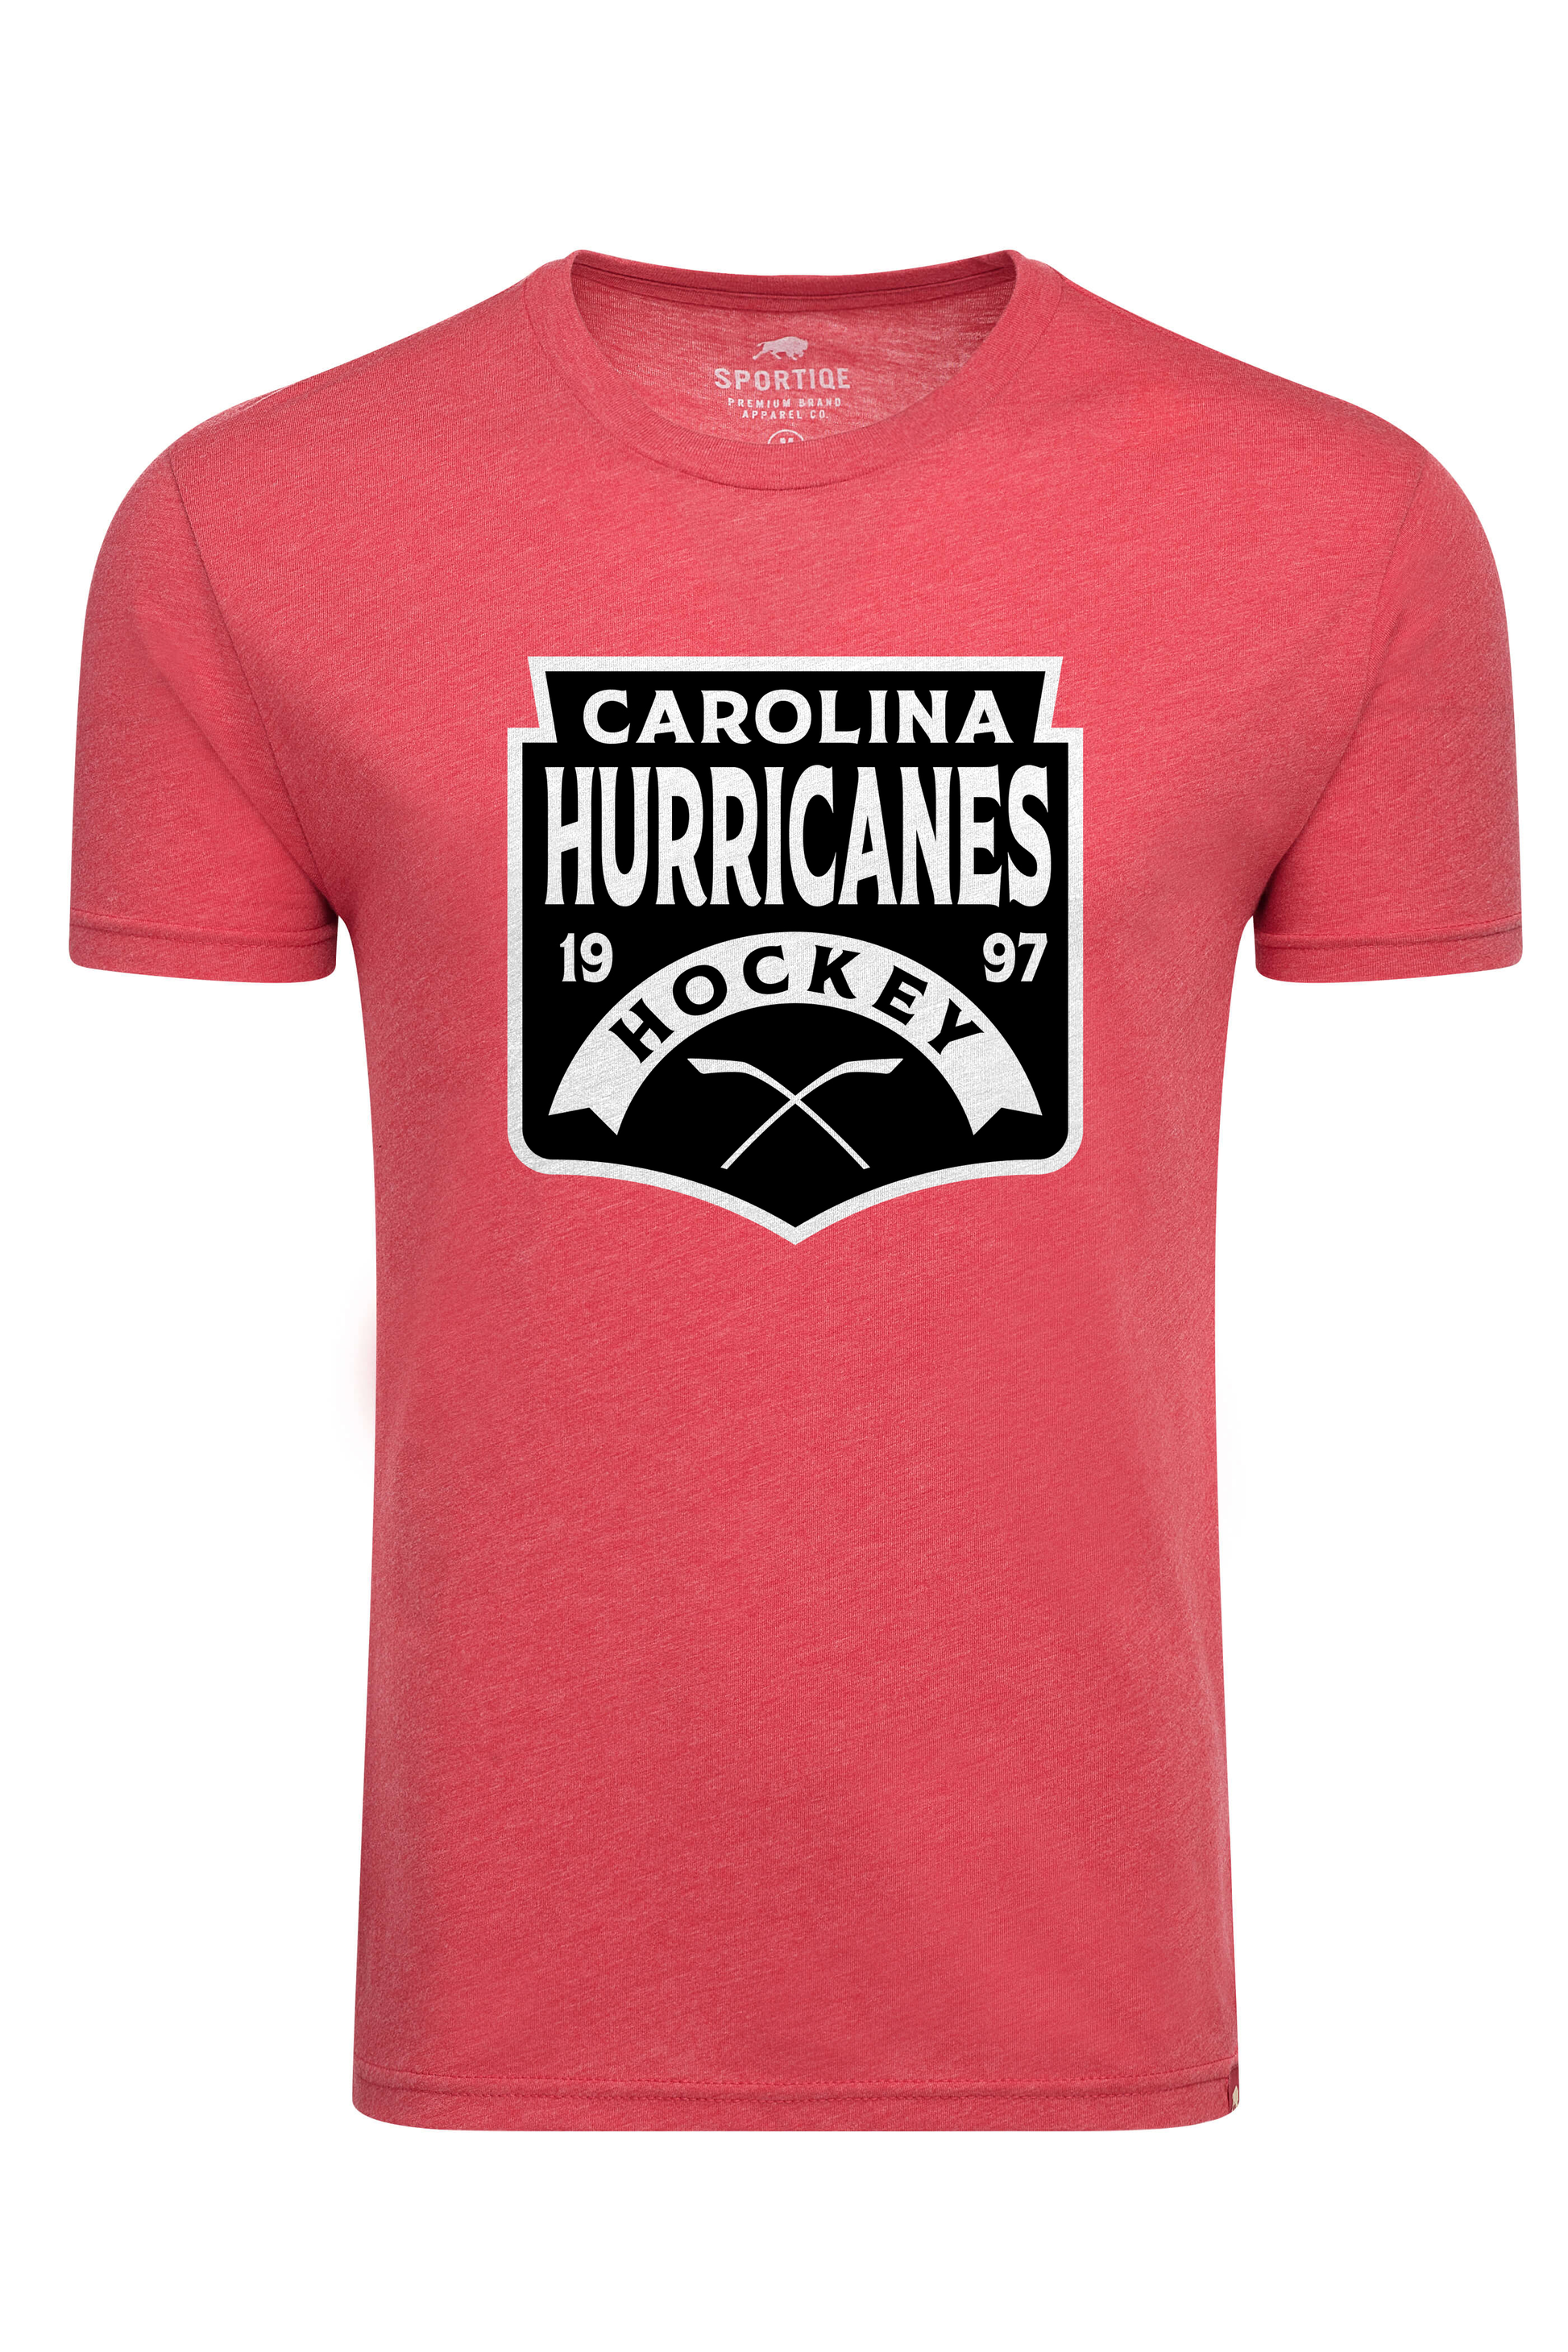 Light red tee with black and white crest that says Carolina Hurricanes Hockey 1997